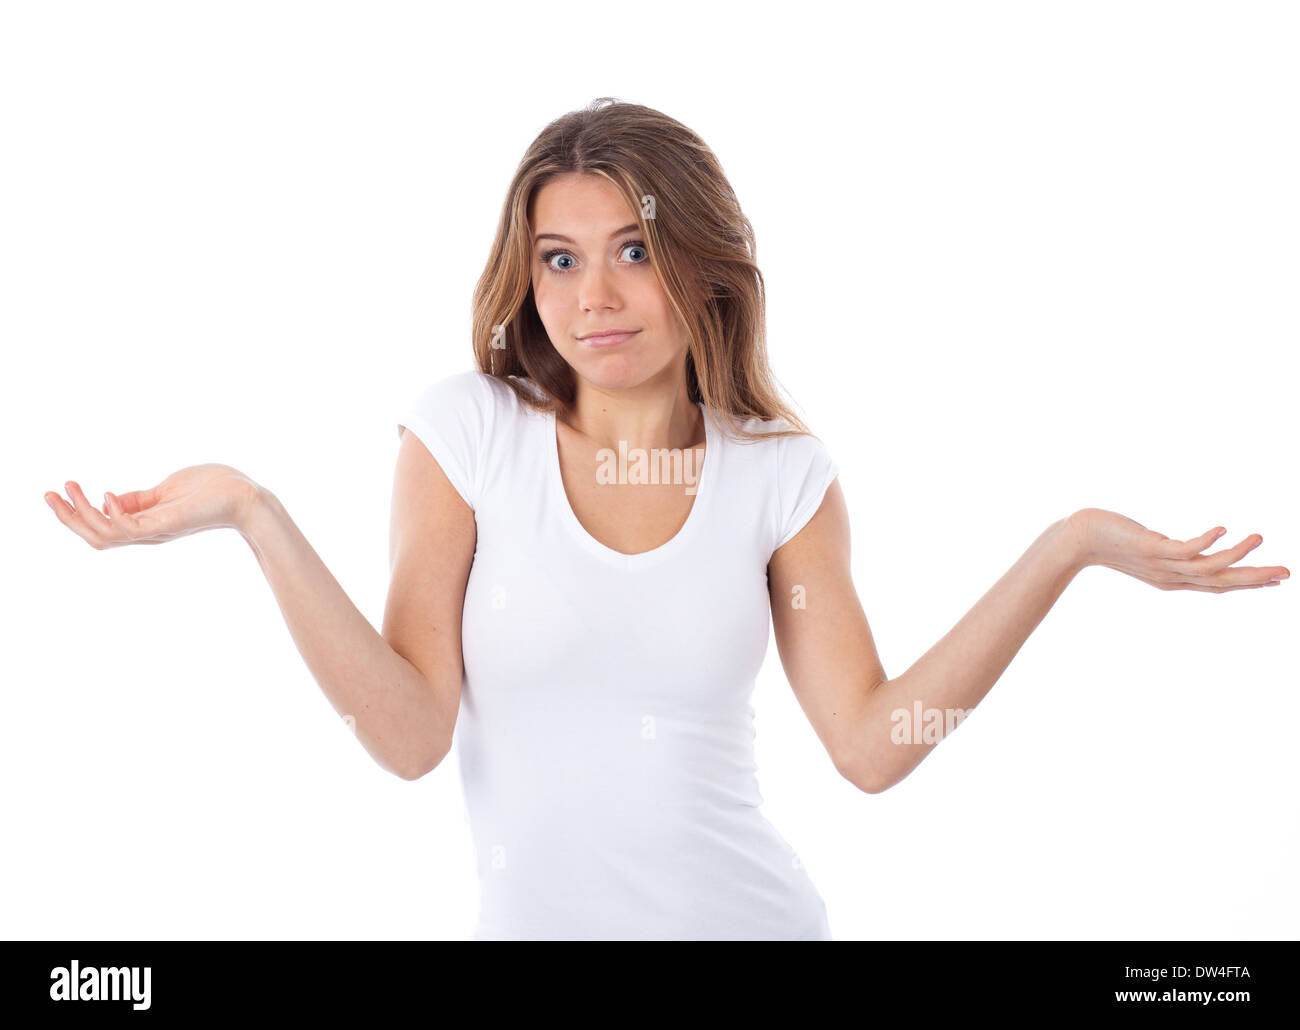 Portrait of a nice woman having a doubting gesture, isolated on white Stock Photo